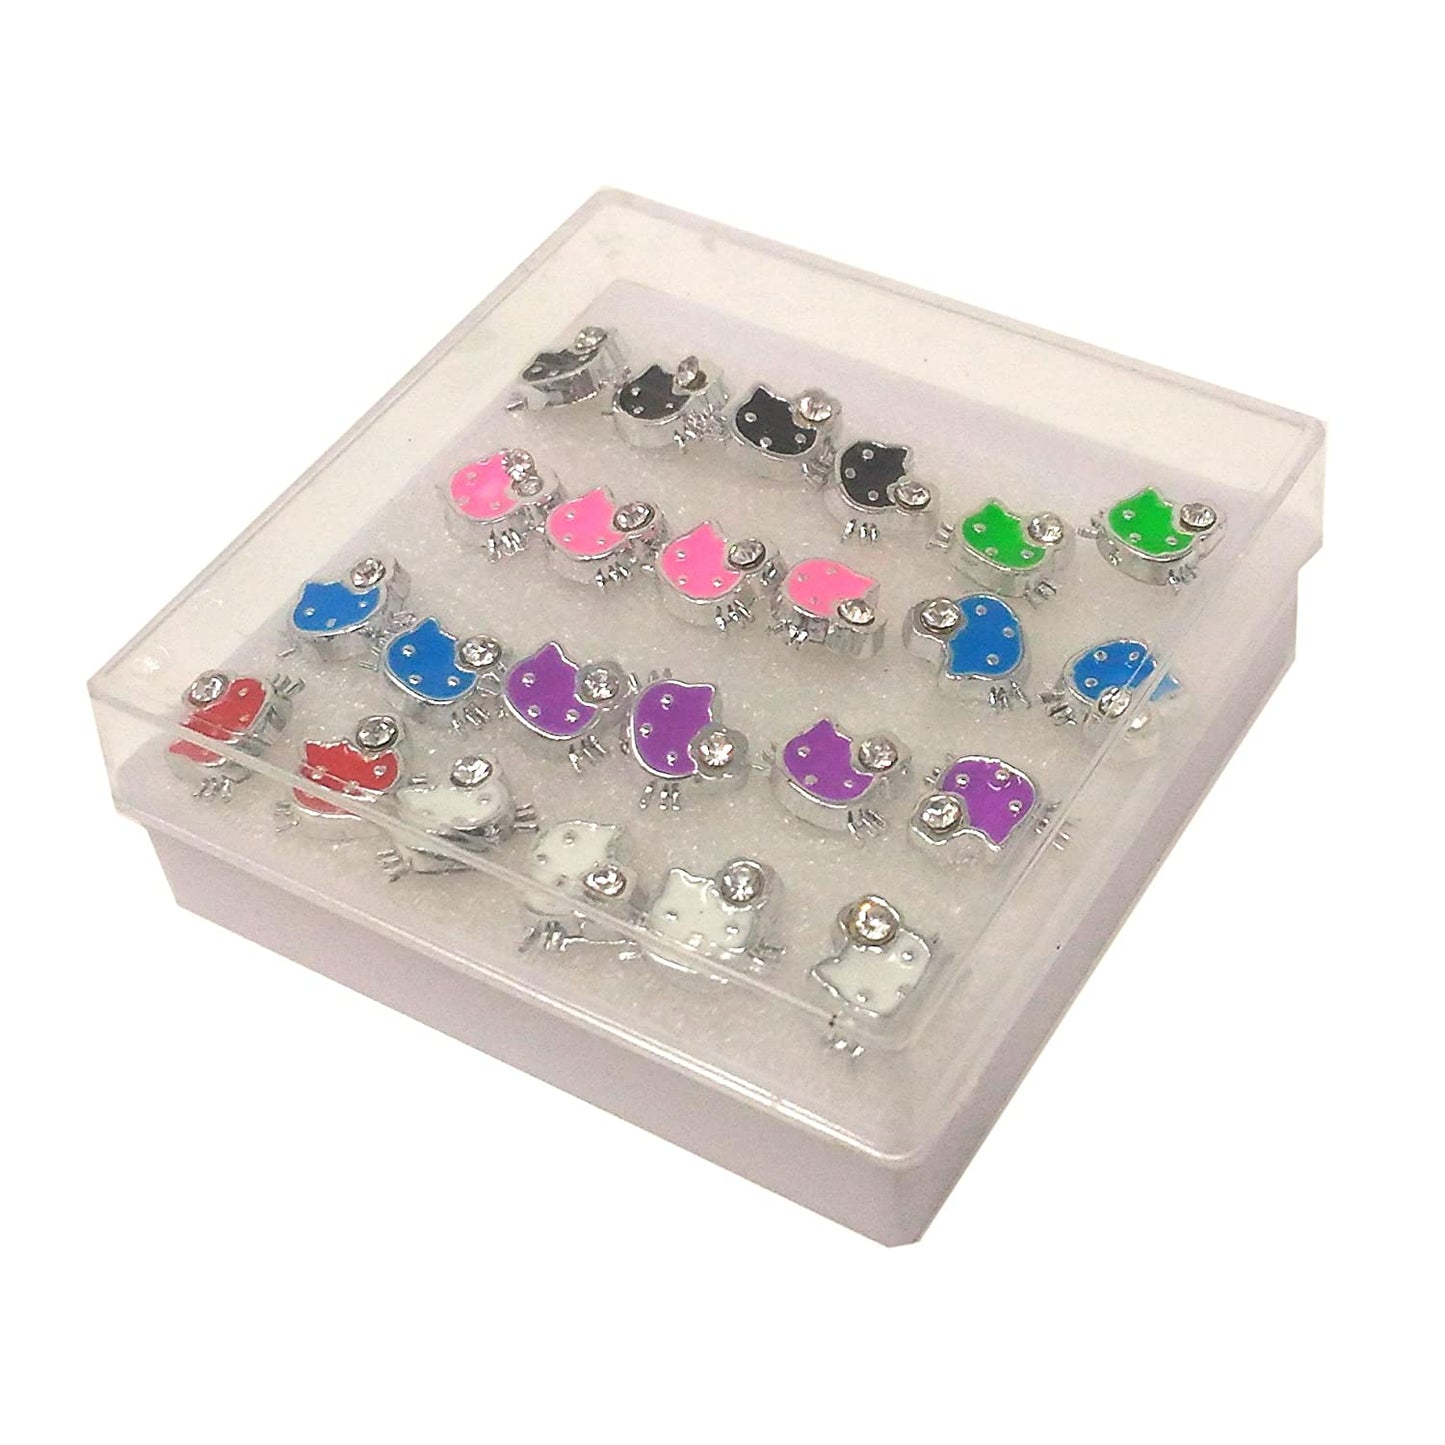 Anokhi ADA Multi-colour Rhinestone Studded Kitty Plastic Stud Earrings for Girls and Women (Pack of 12 Pairs)-(AR-13)